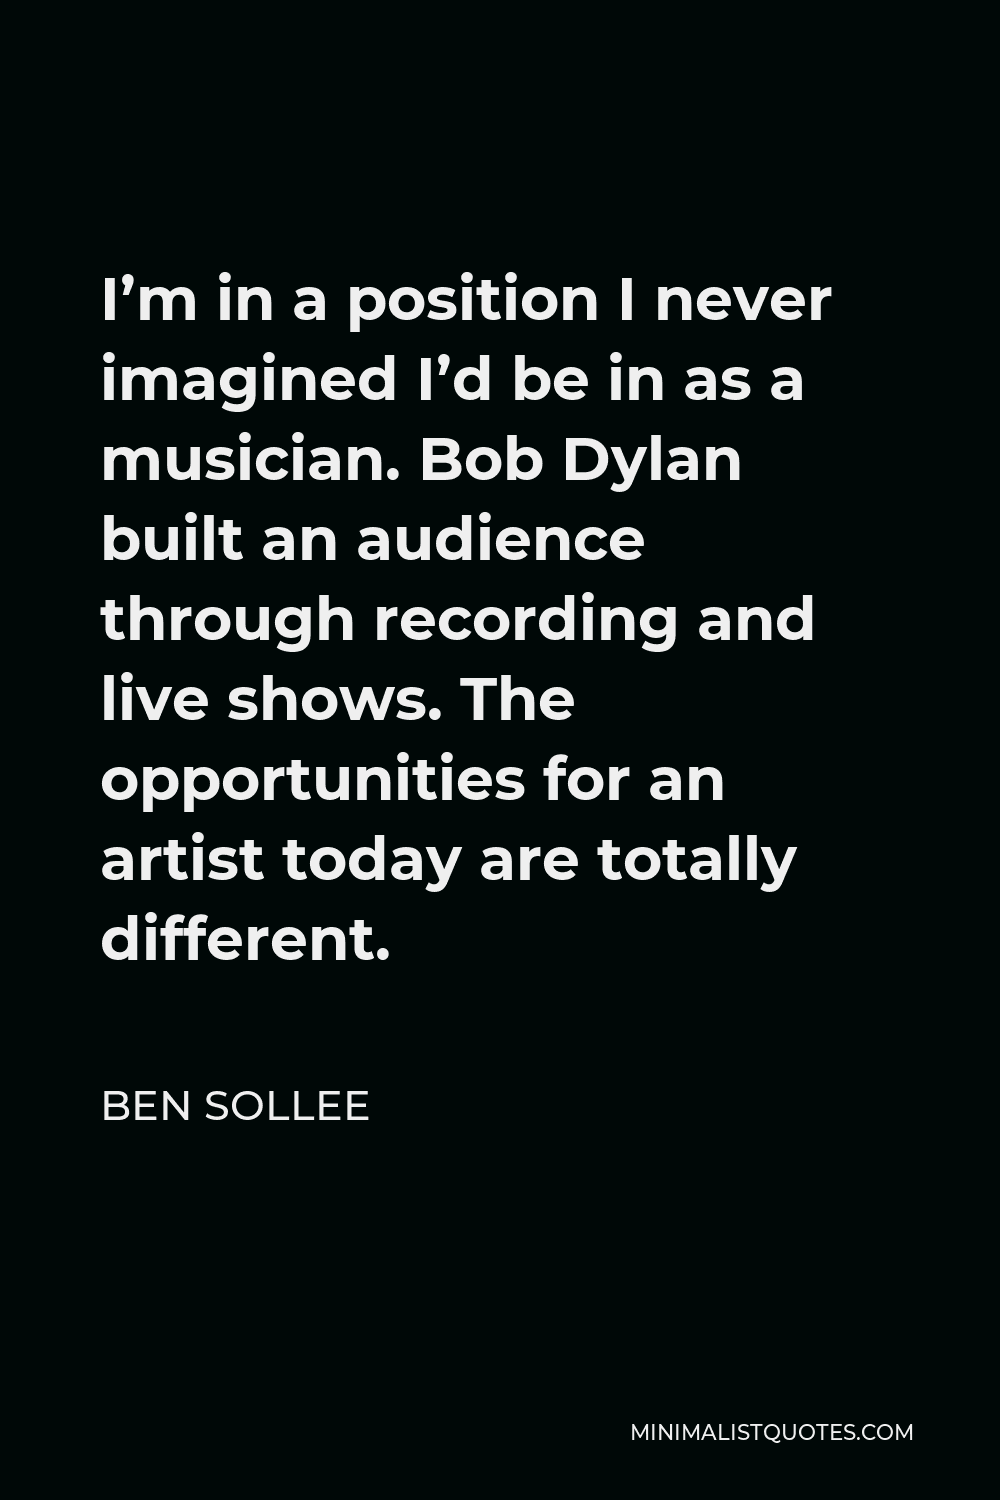 Ben Sollee Quote - I’m in a position I never imagined I’d be in as a musician. Bob Dylan built an audience through recording and live shows. The opportunities for an artist today are totally different.